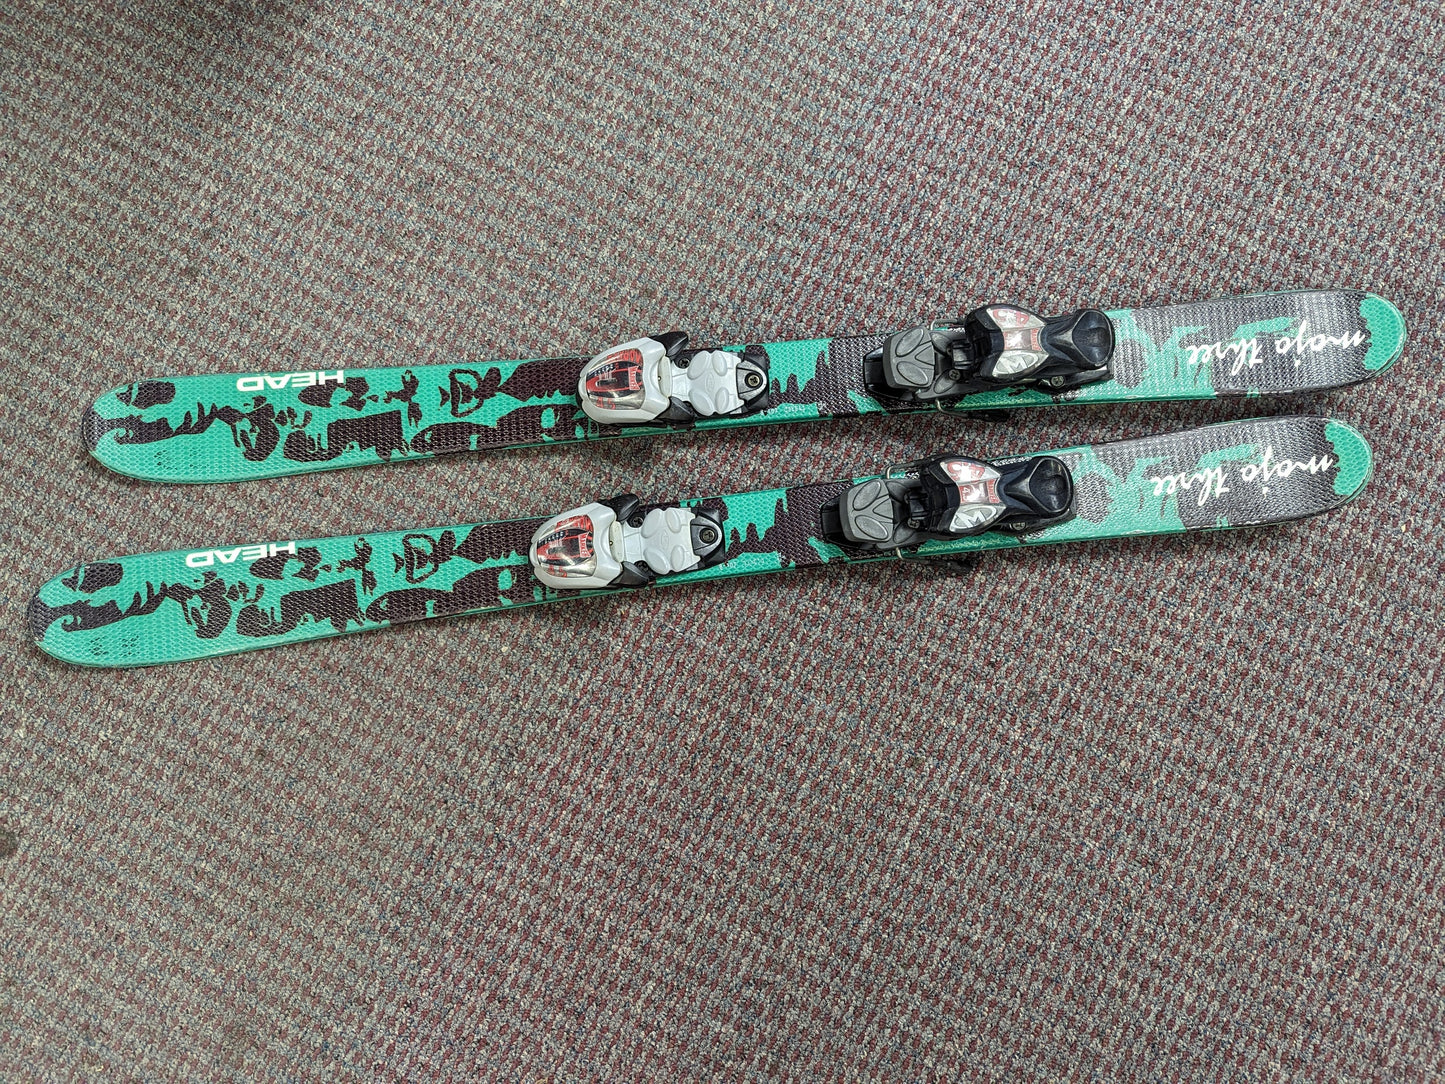 Head Mojo Three Skis w/Marker Bindings Size 107 Cm Color Green Condition Used